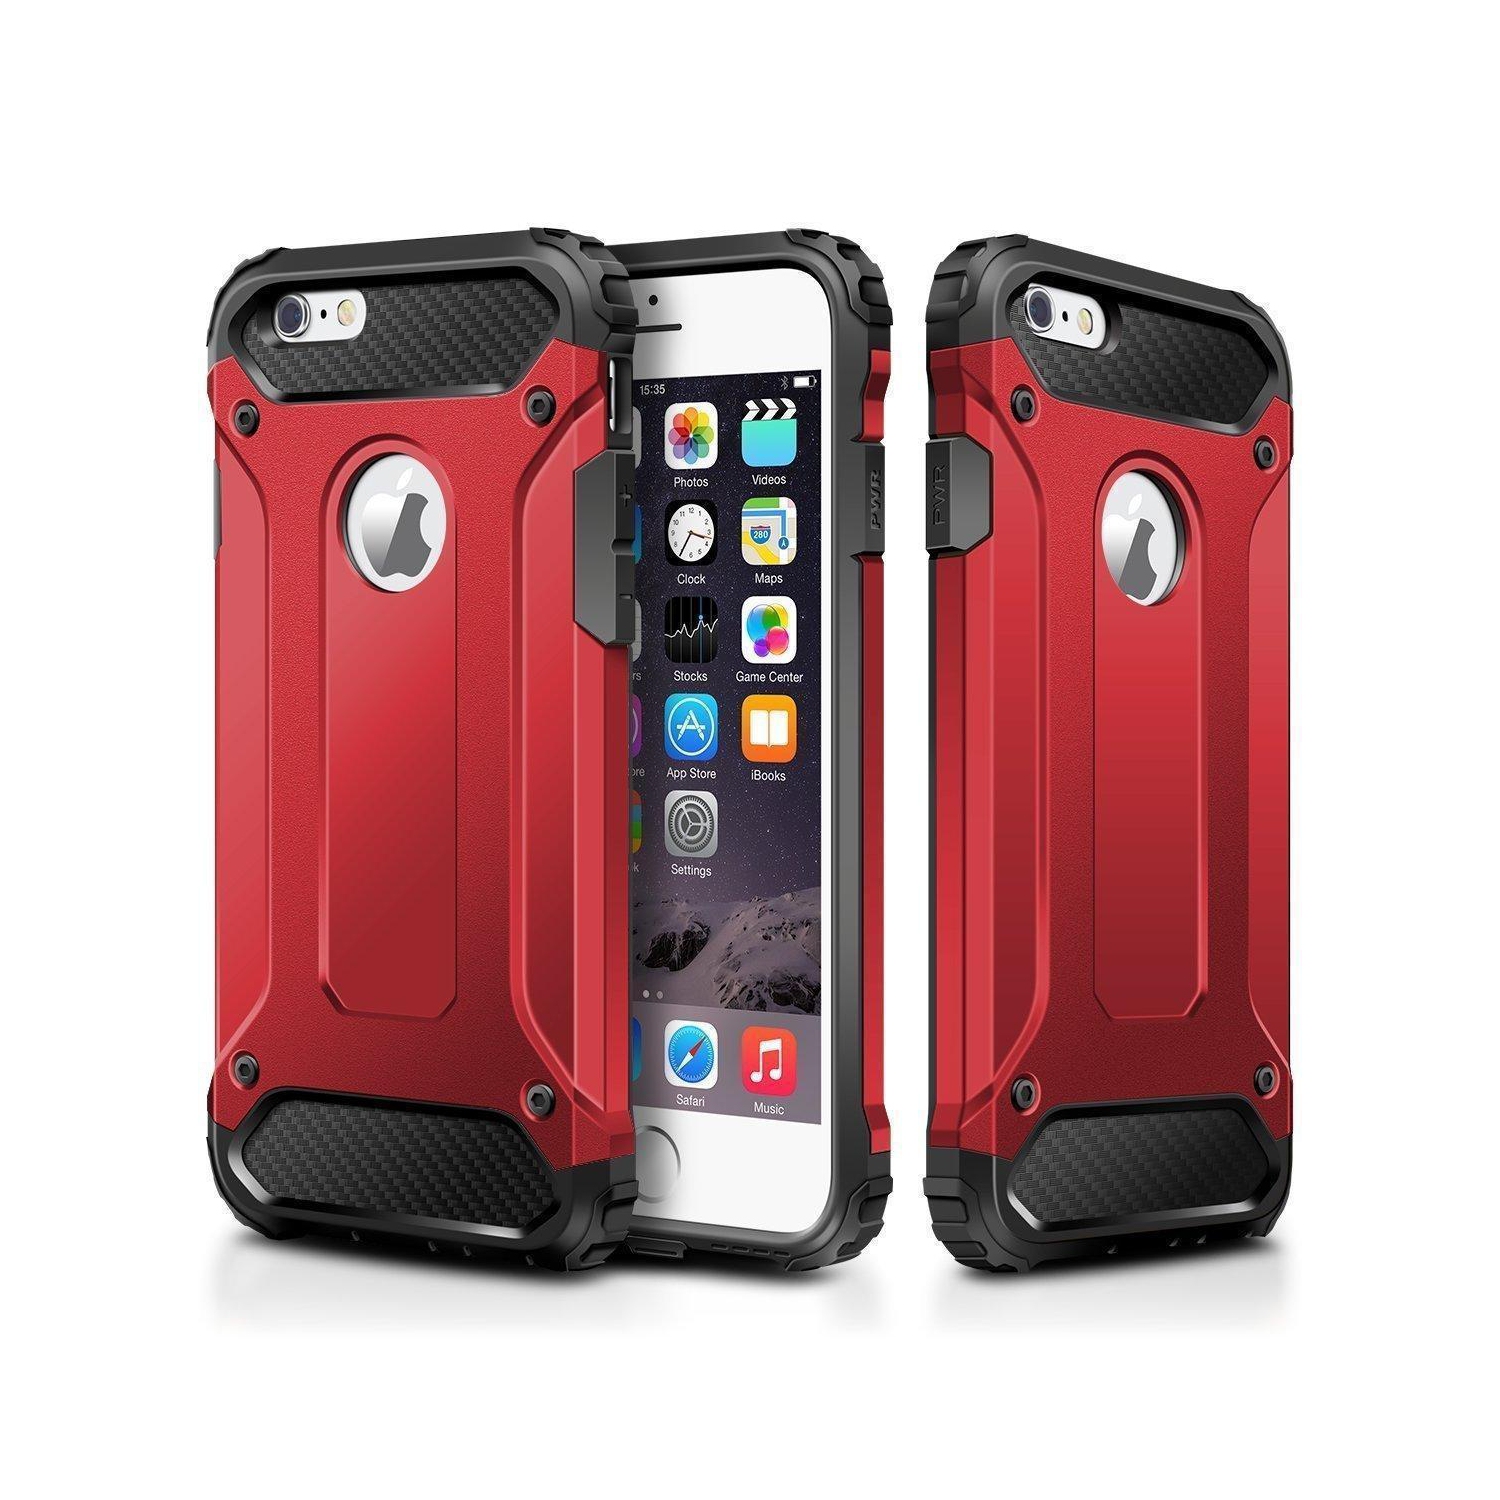 Hybrid Armor Shockproof Rugged Bumper Case For Apple iPhone 7 Plus / 8 Plus (Red)